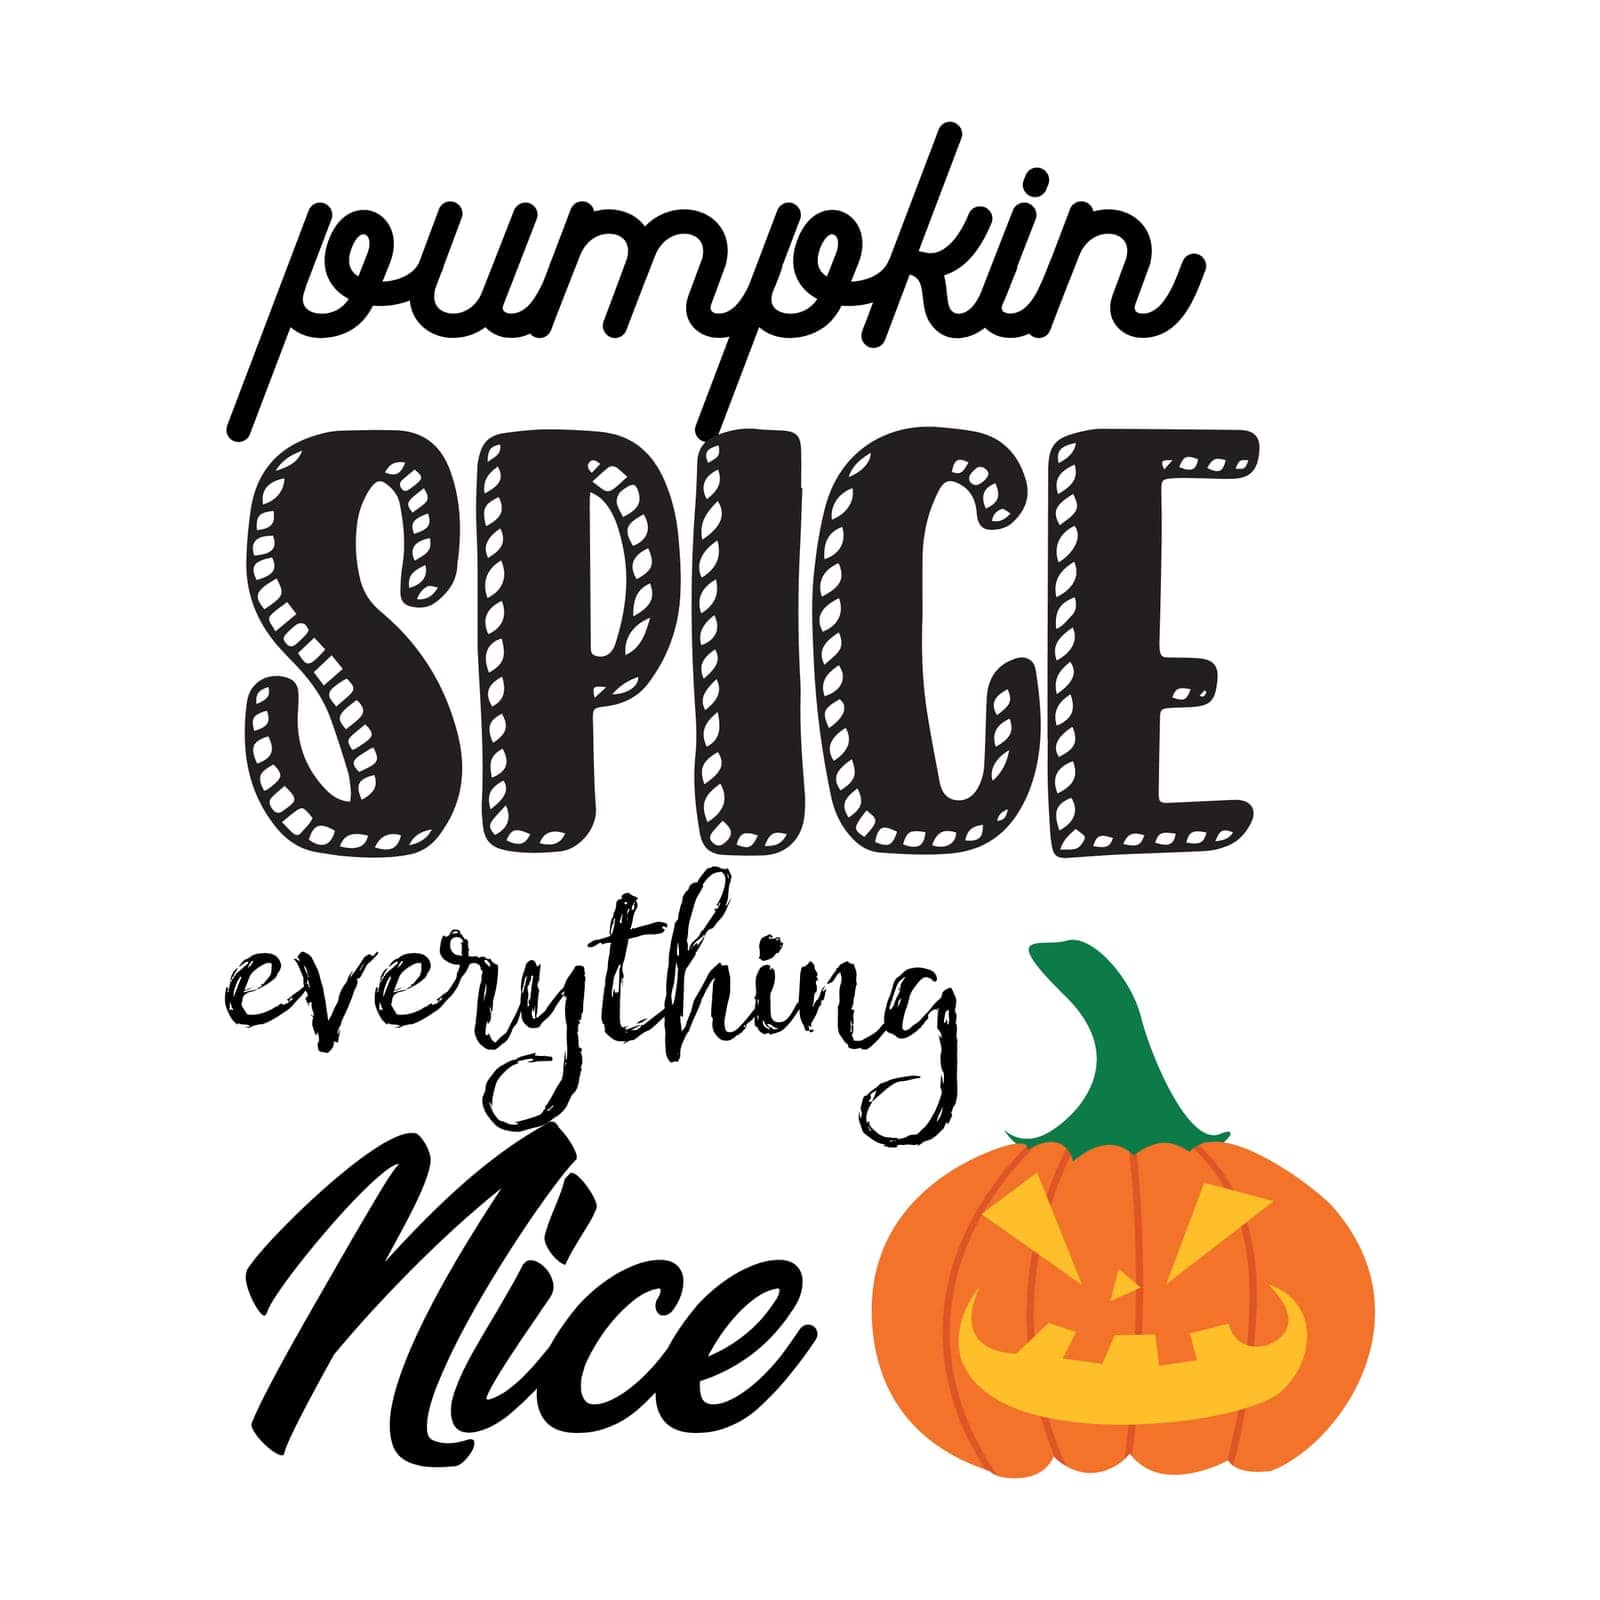 Vector Halloween poster with Pumpkin Spice Everything Nice inscription near traditional jack o lantern decoration